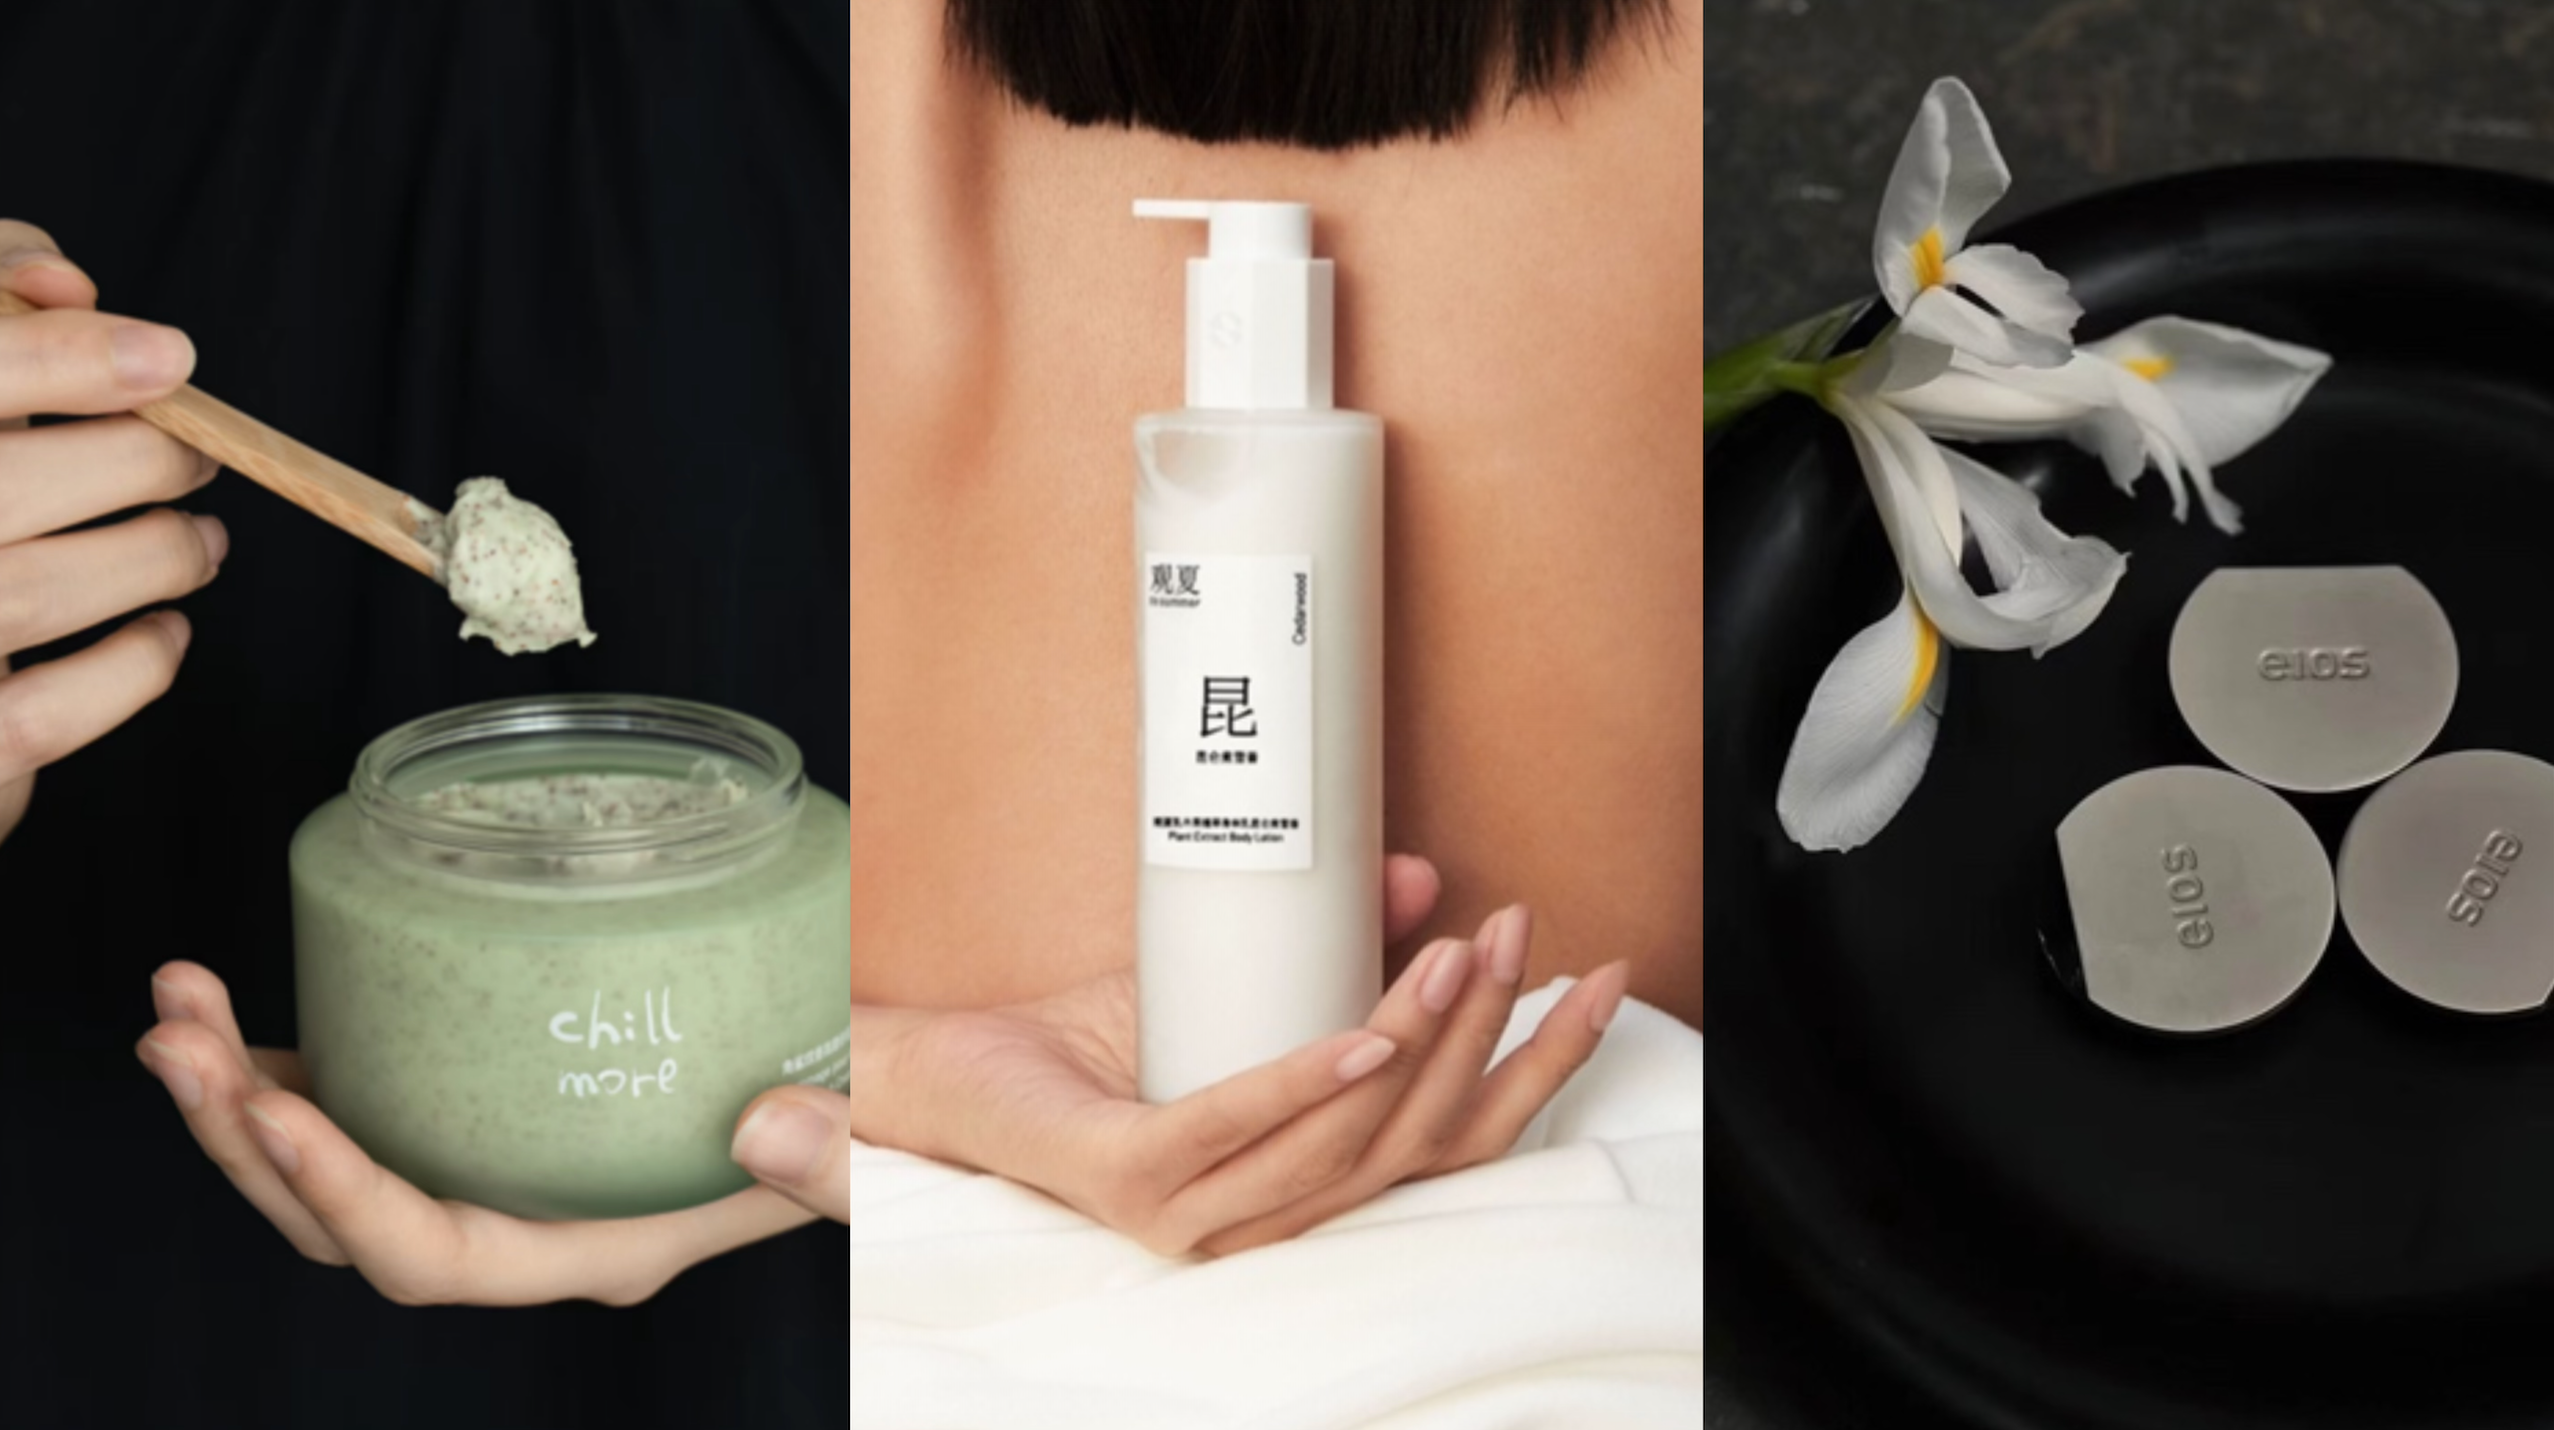 China’s new beauty trend: Body care ‘skinification’